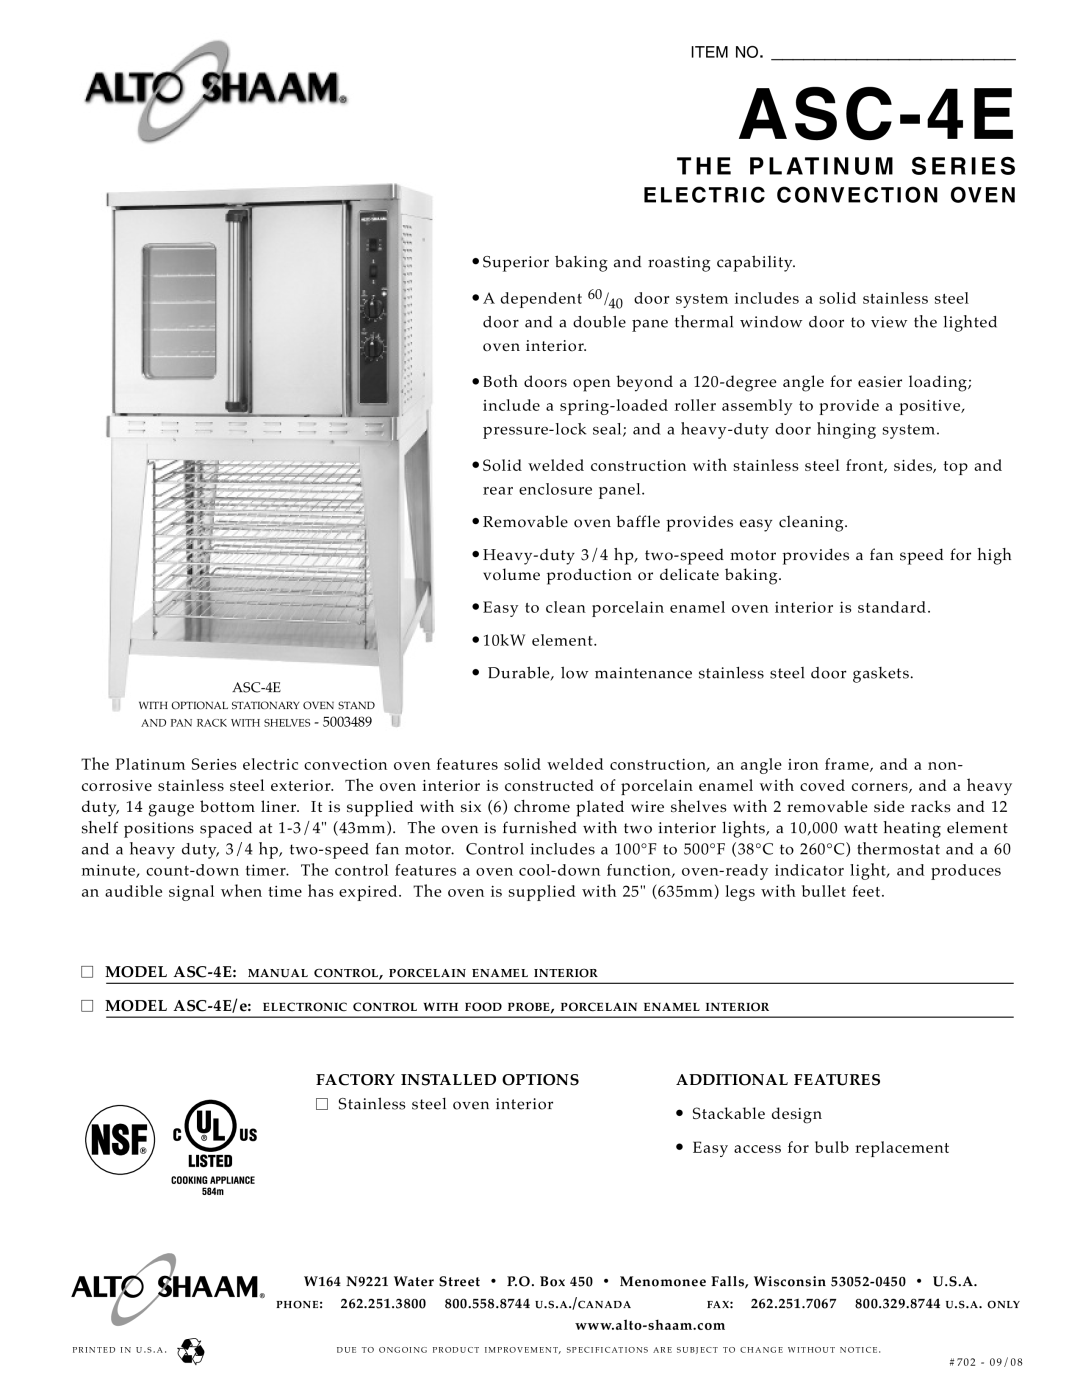 Alto-Shaam ASE-4E specifications ASC-4E, El Ectric Convection Oven, Factory Installed Options, Additional F Eatures 